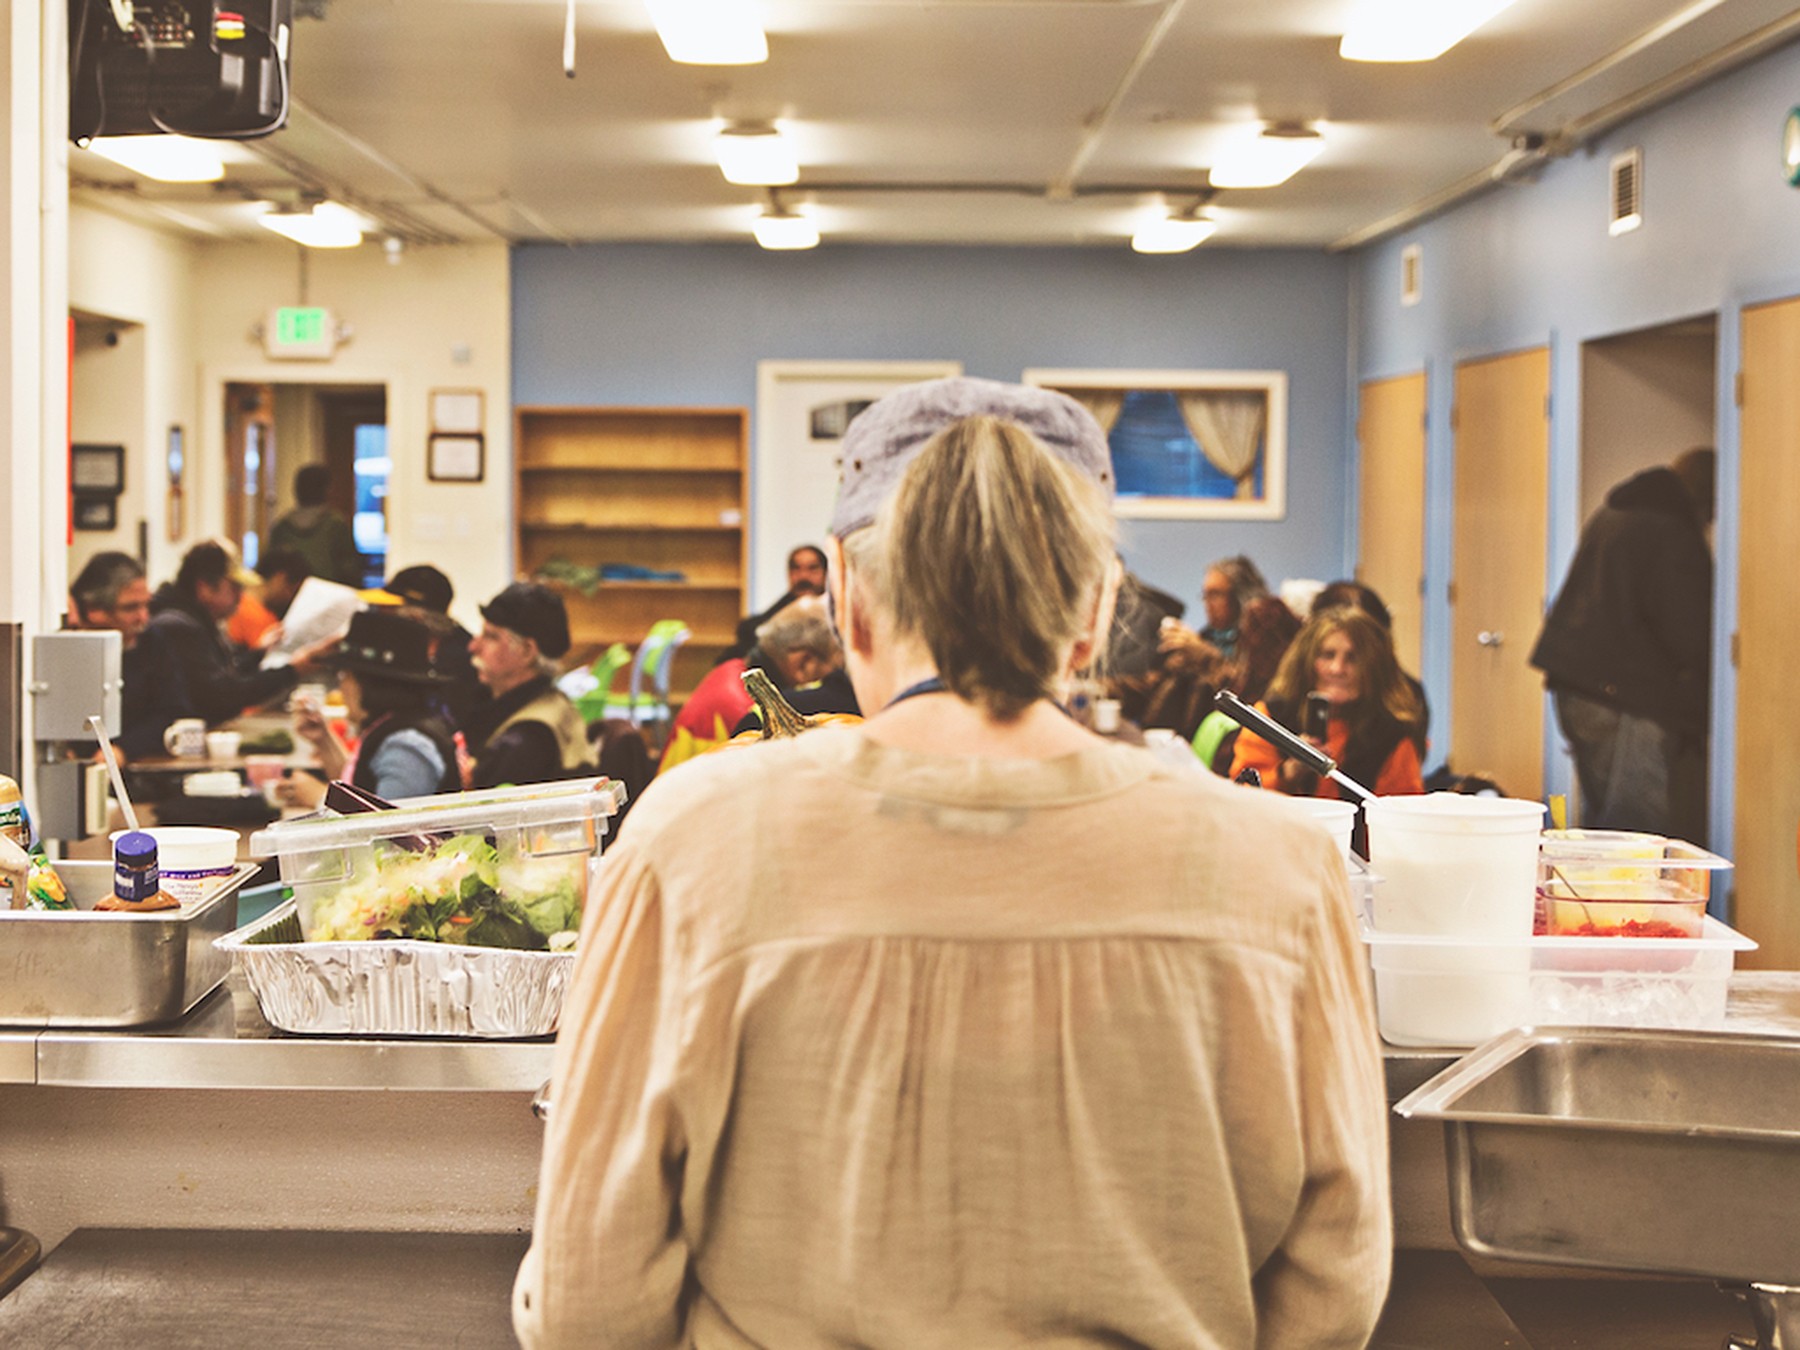 A volunteer works on preparing food at the front of a full soup kitchen.